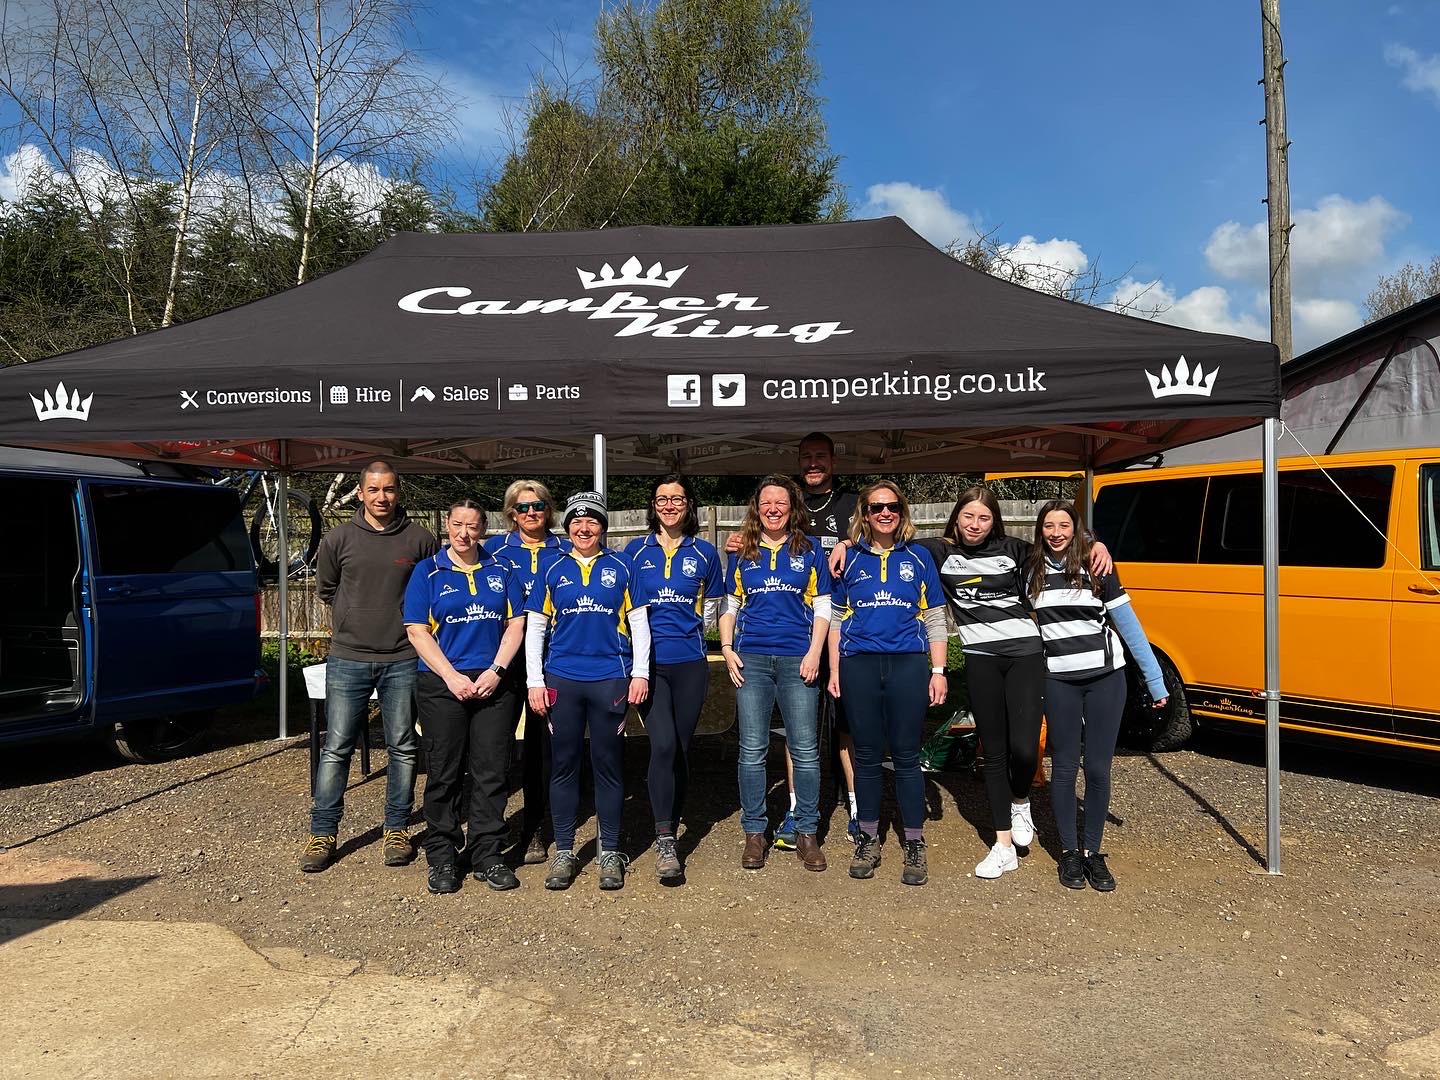 CamperKing sponsors Stratford Rugby Club's 24-hour walkathon to raise funds for DEC Ukraine Appeal